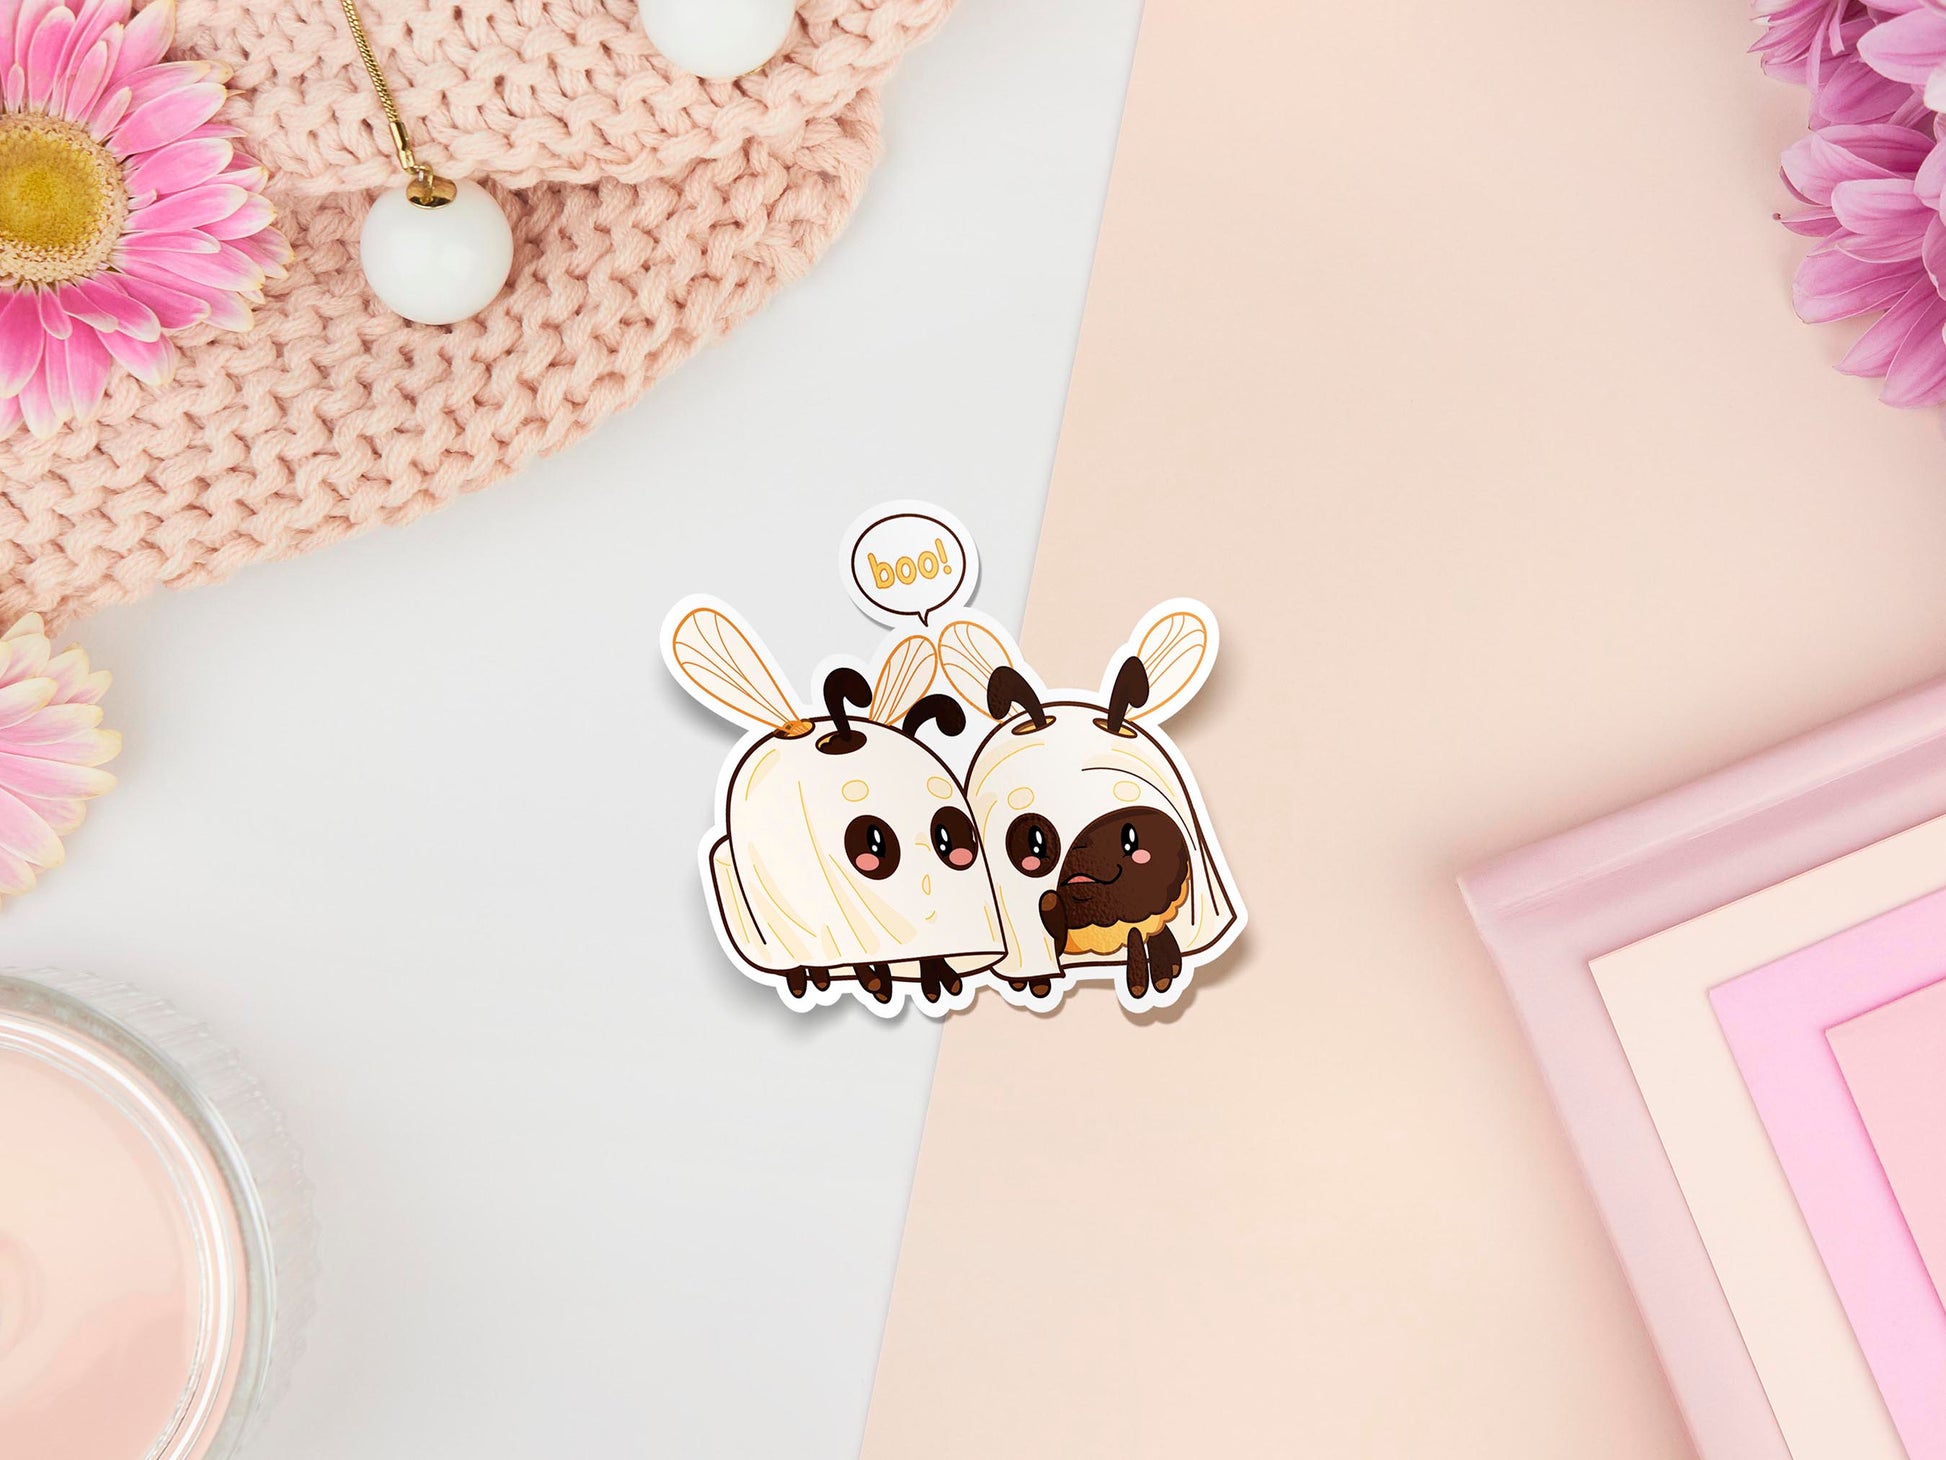 A sticker of digital illustrated cartoon of two bees dressed as ghosts with the speech bubble boo! To represent the pun Boo-bees